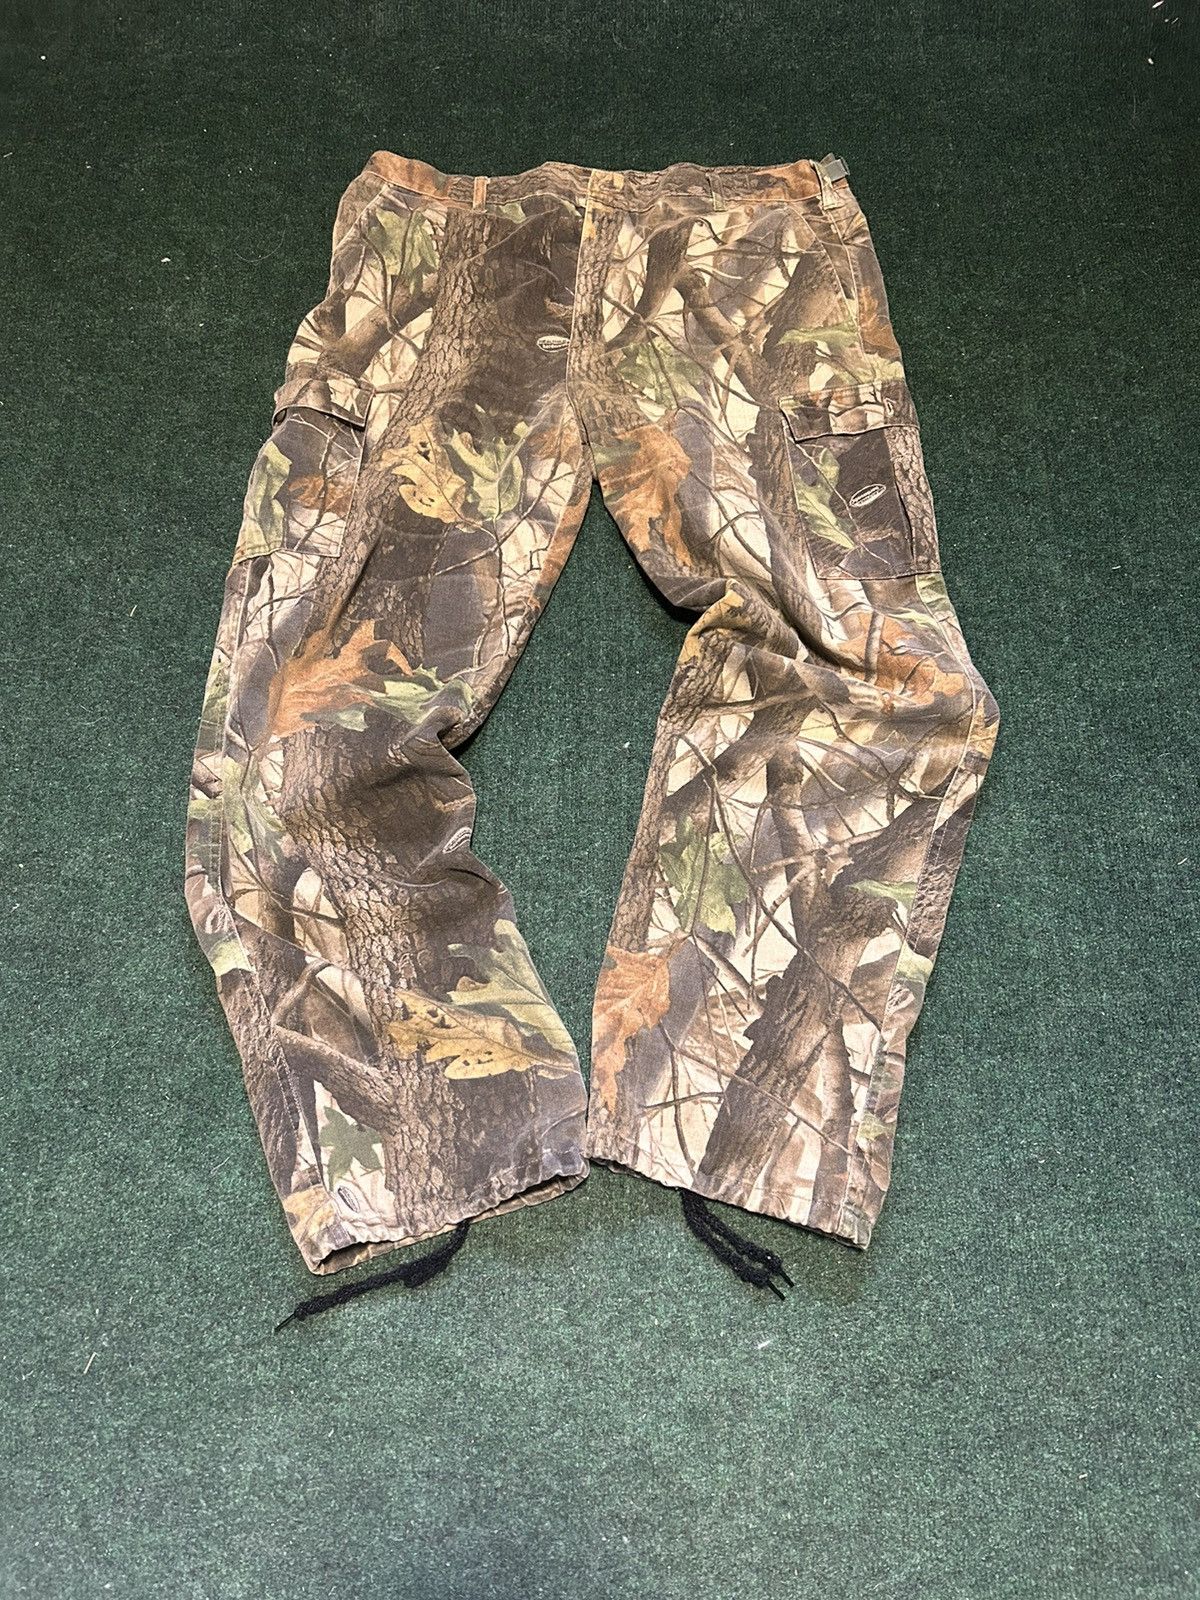 1990s Realtree Camouflage Utility Cargo Pants [24-28 x 30] – From